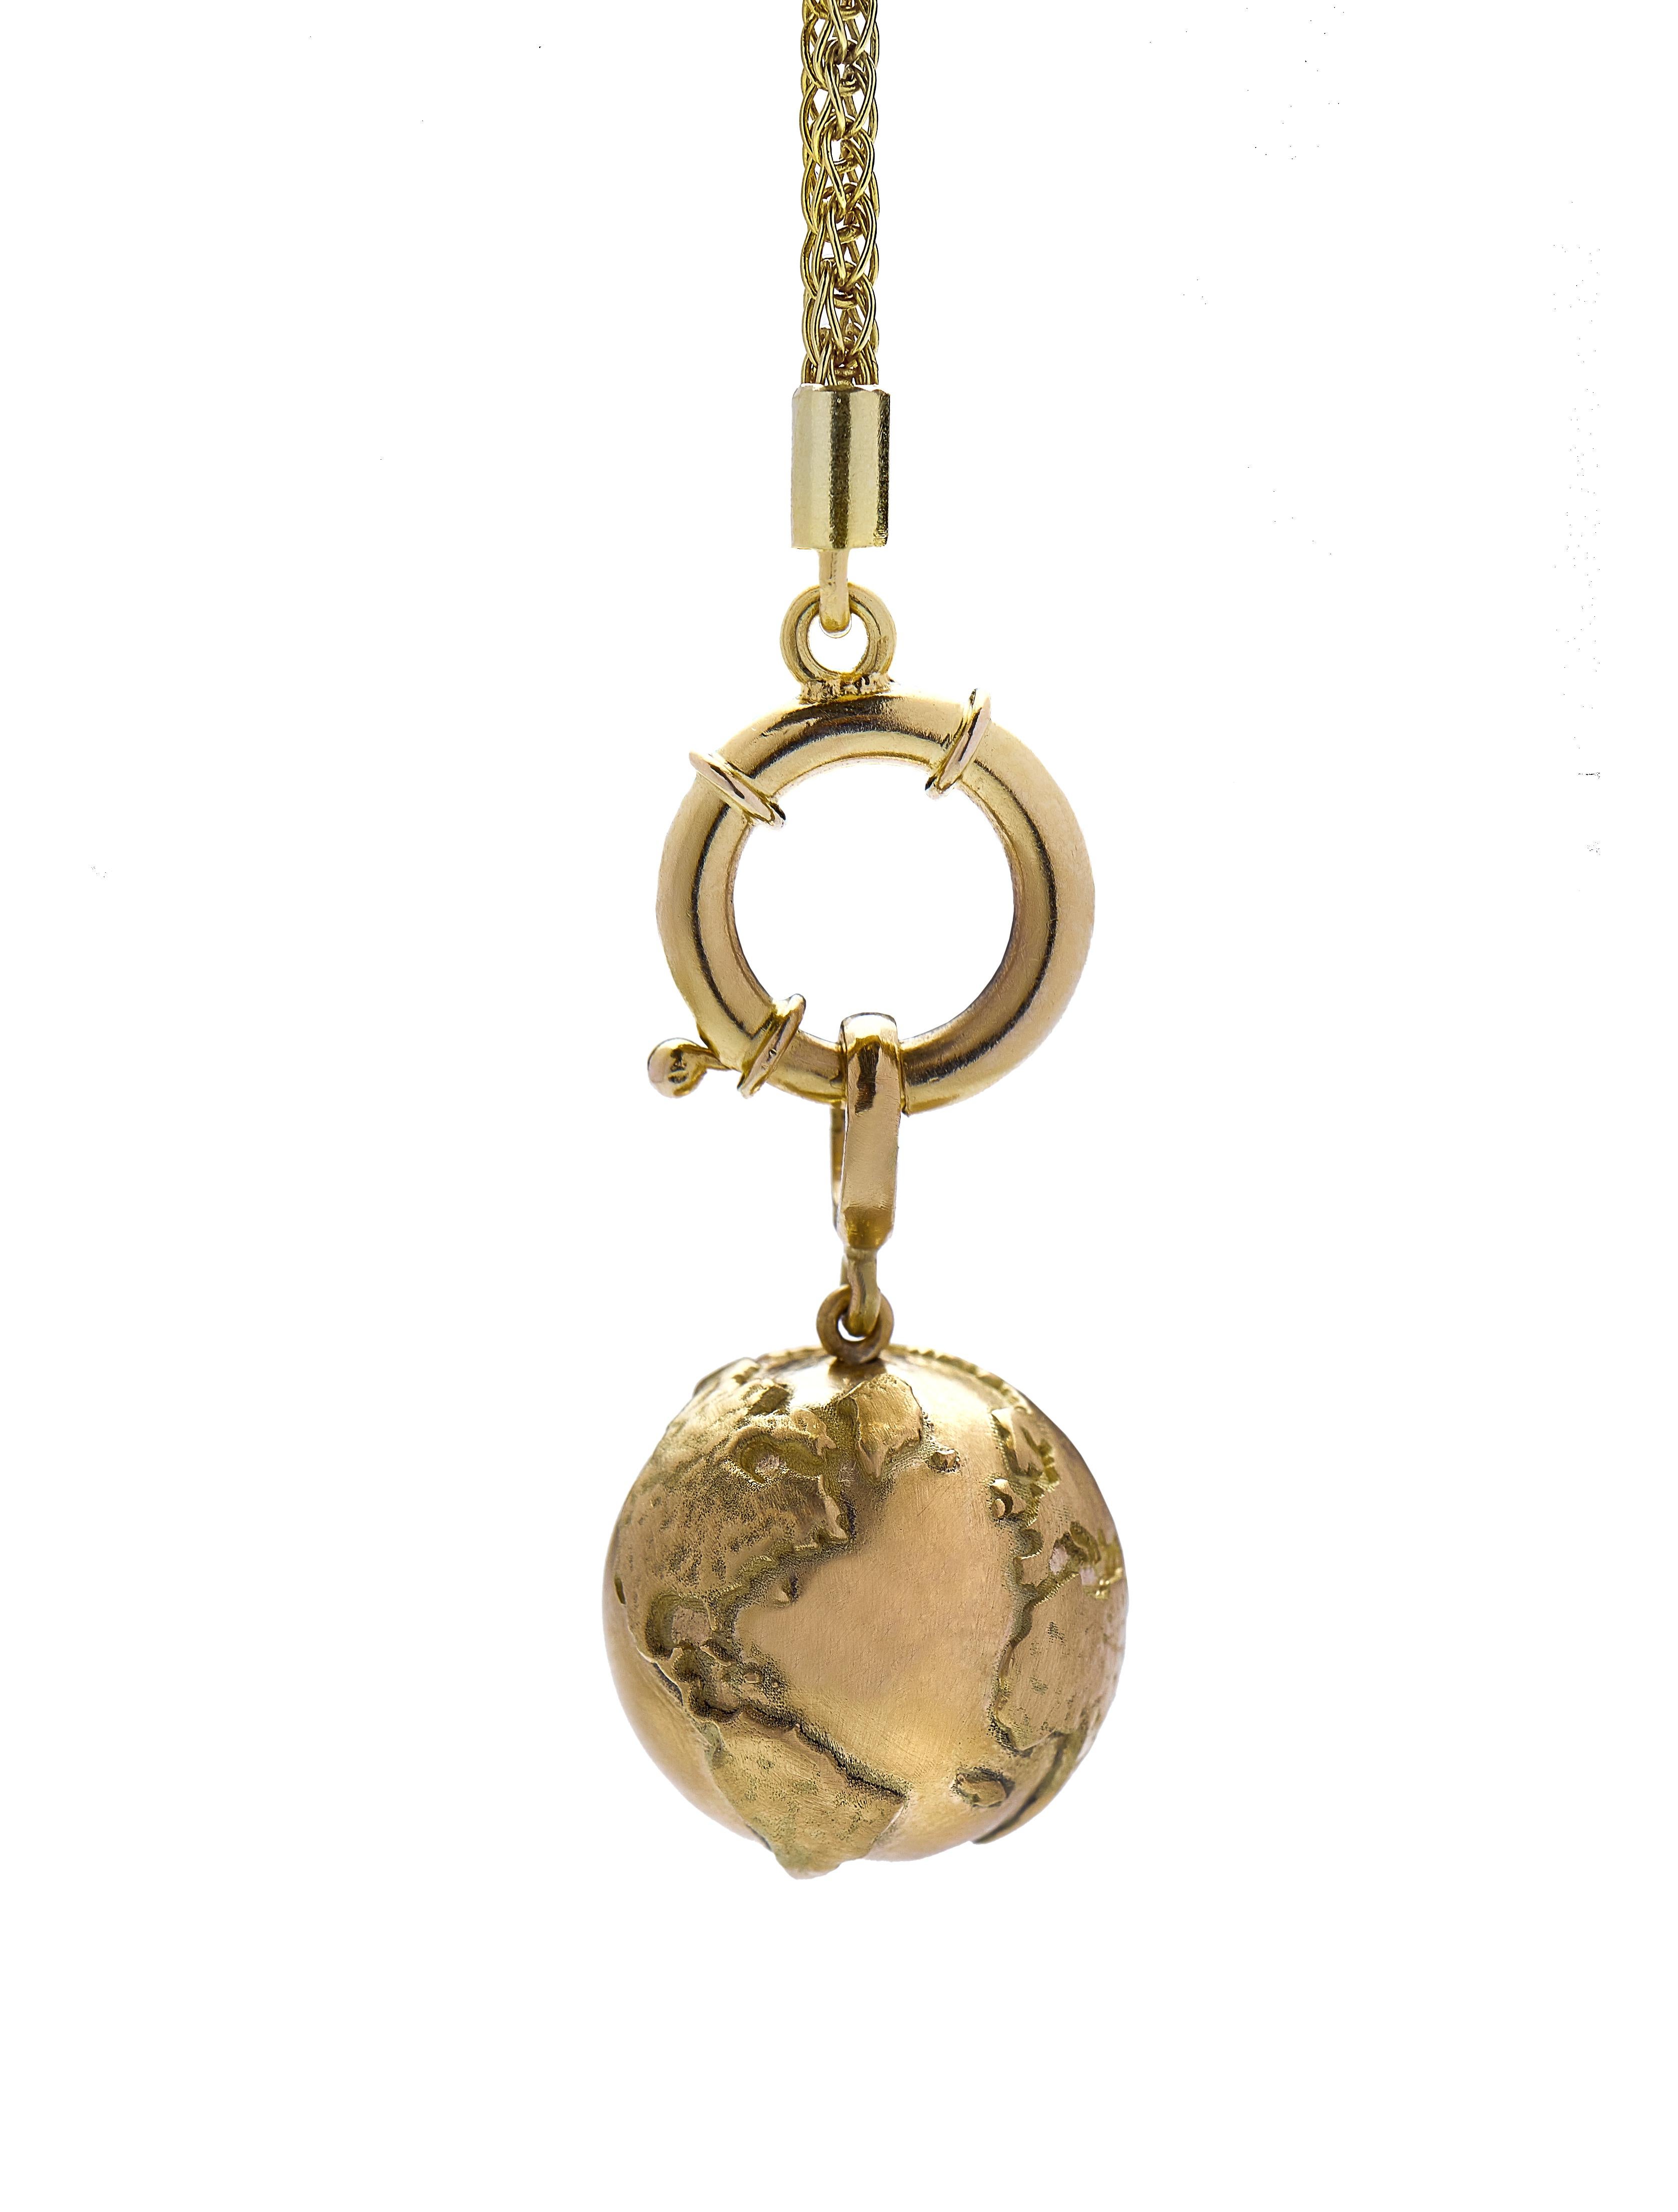 The Earth pendant is designed by Christina Alexiou.

The Earth pendant is crafted with 18k yellow gold and handmade in Greece.
The Earth is hollow, thus this pendant is an easy to wear everyday piece of jewelry. This piece features the element of